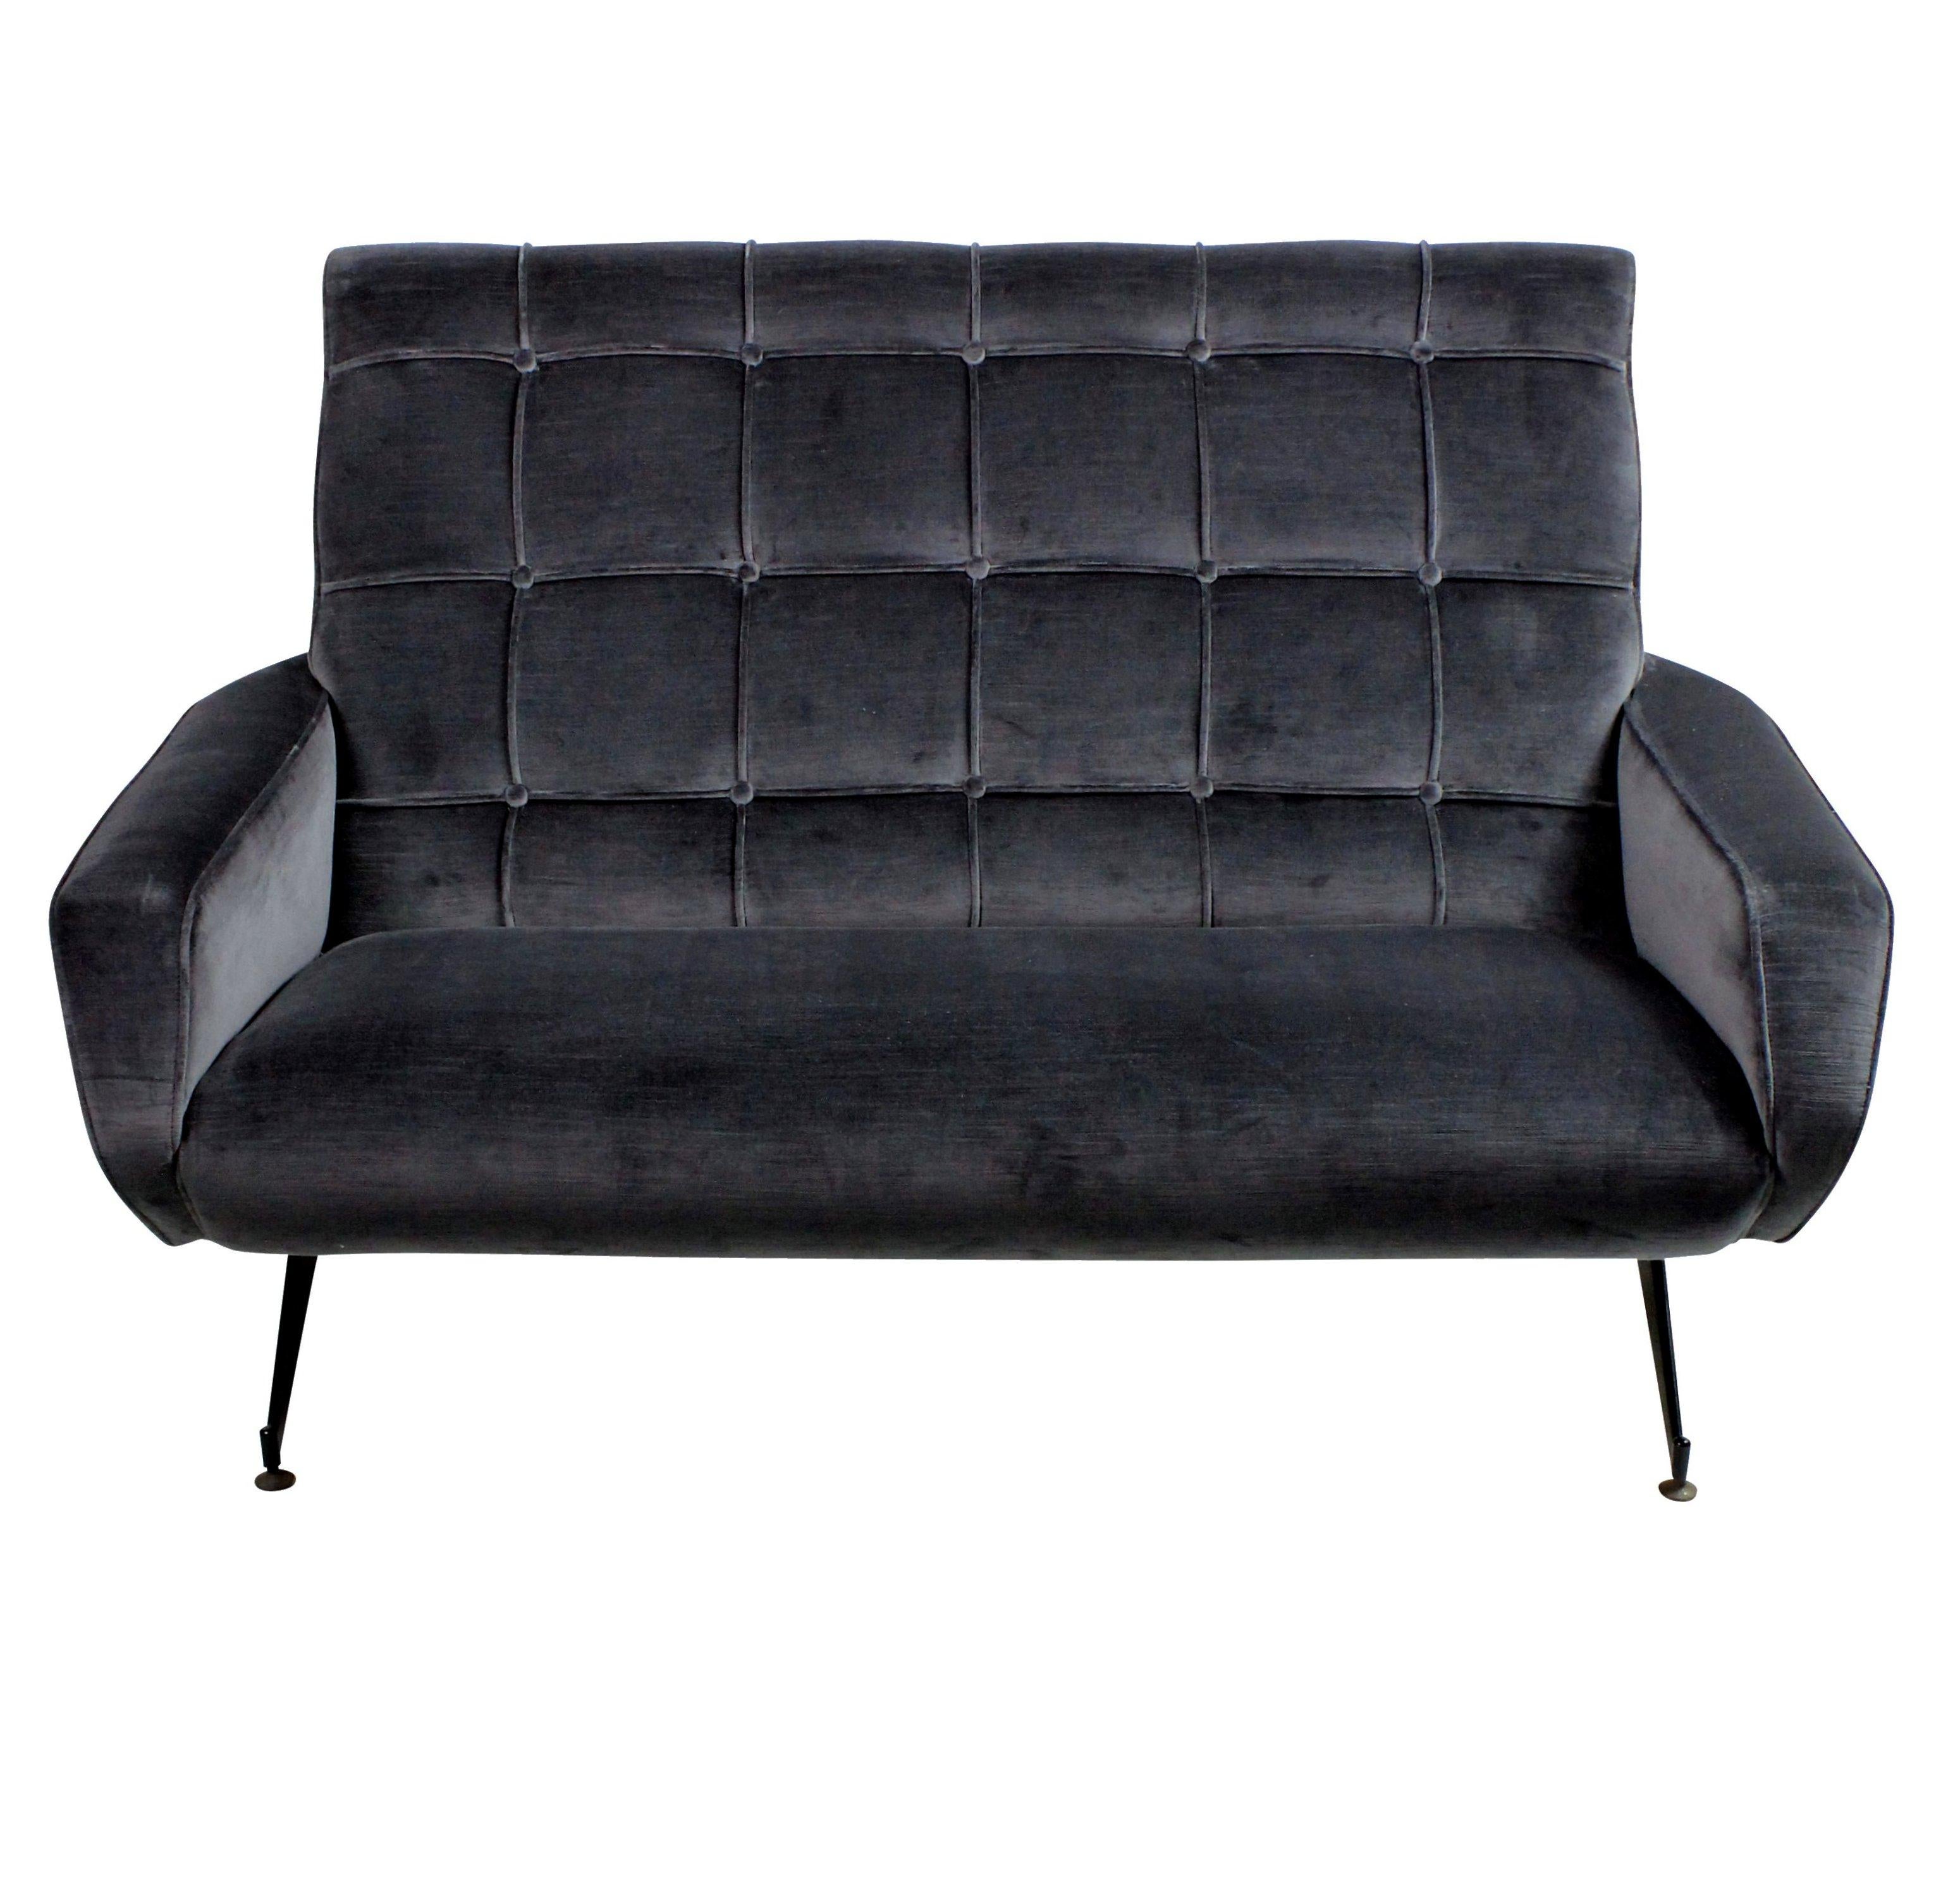 An Italian two-seat settee in the style of Arflex, with detailed buttoned back and angular shape, supported on black enameled legs. Newly upholstered in ribbed blue or grey velvet.